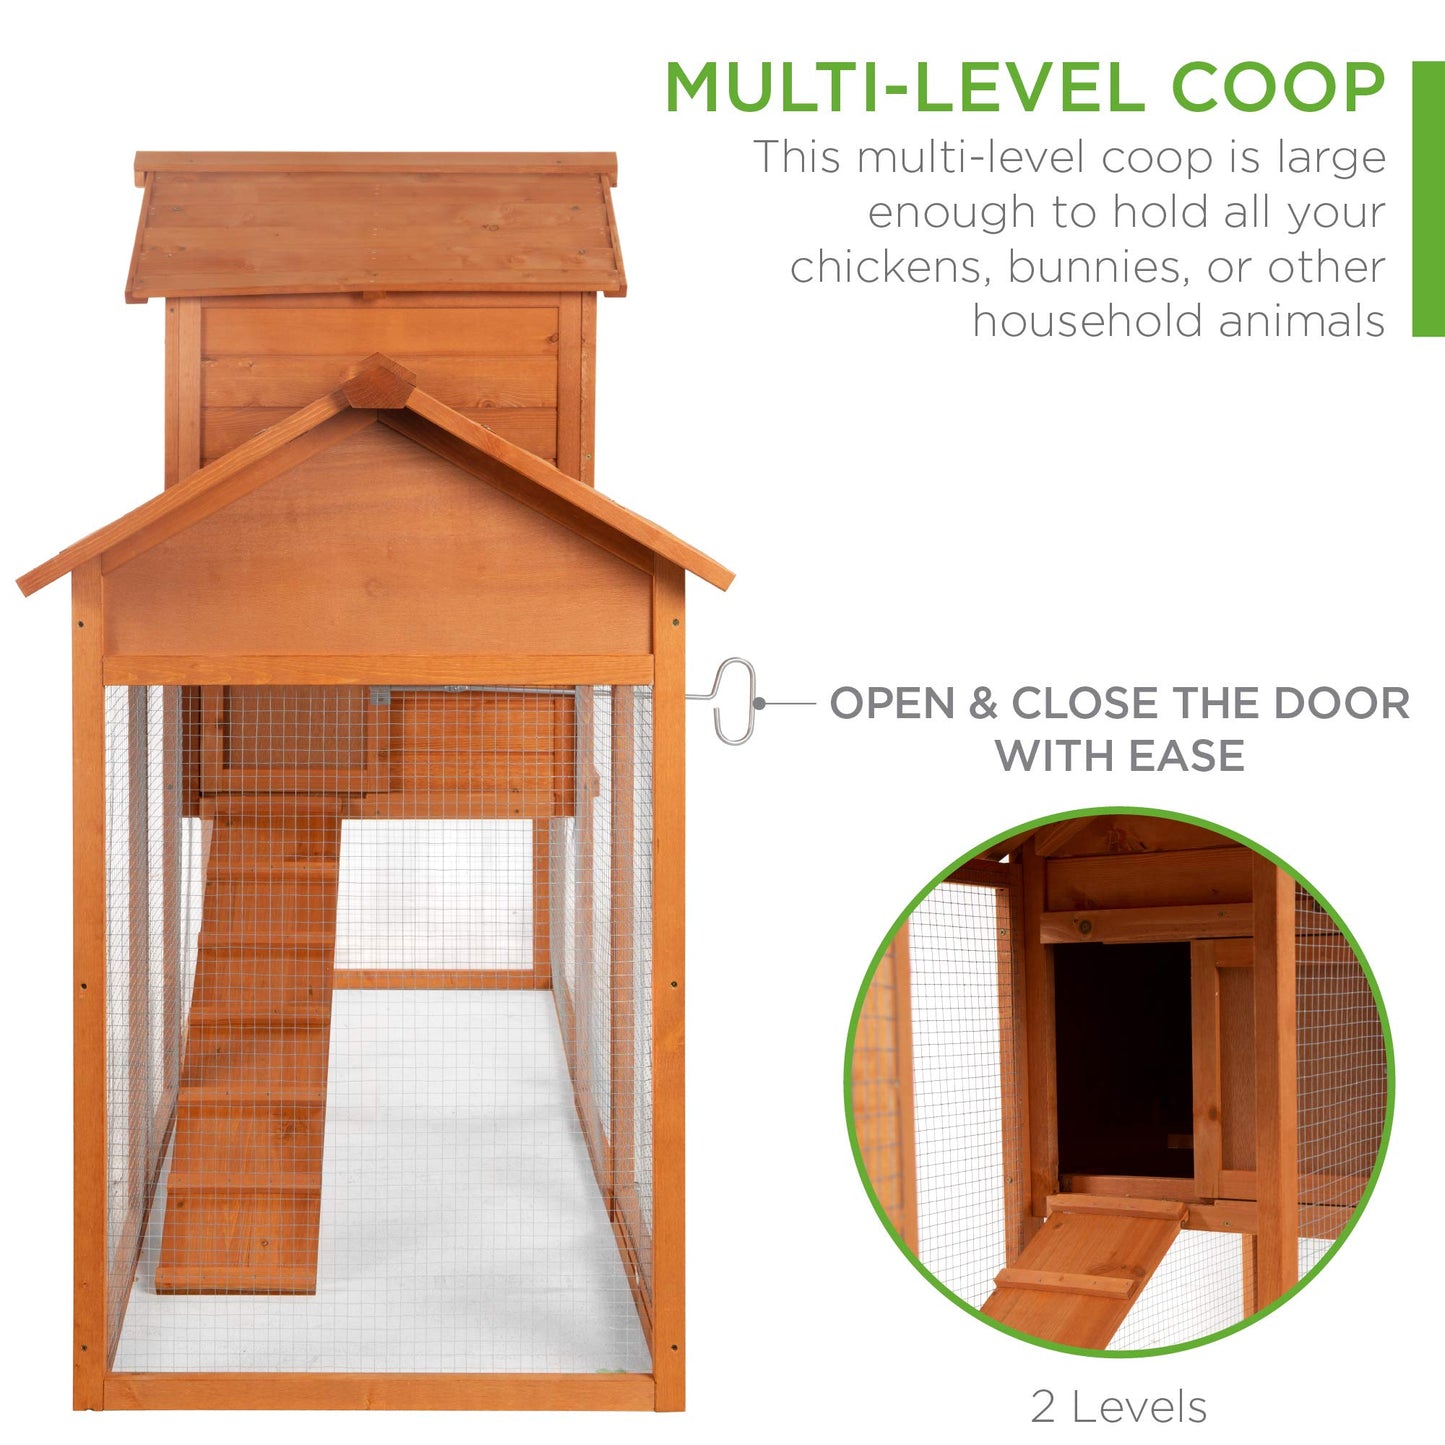 Best Choice Products 80in Outdoor Wooden Chicken Coop Multi-Level Hen House, Poultry Cage w/Ramps, Run, Nesting Box, Wire Fence, 3 Access Areas